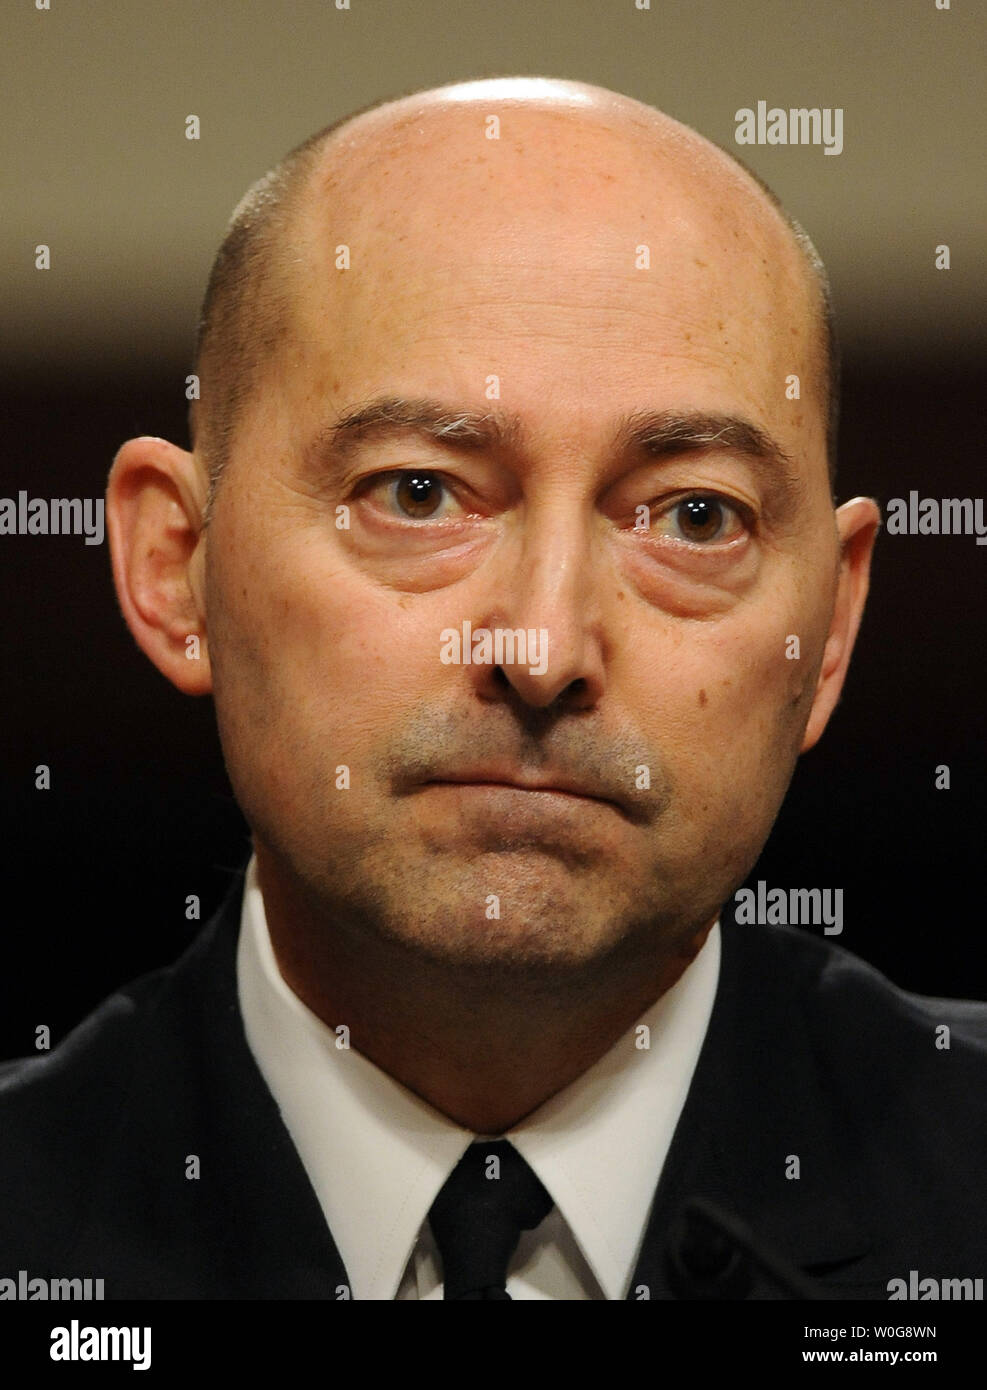 Navy Adm. James Stavridis, commander of the U.S. European Command and supreme allied commander, Europe testifies before the Senate Armed Services Committee regarding the U.S. European Command and U.S. Strategic Command budget for 2012 and beyond on Capitol Hill in Washington on March 29, 2011.    UPI/Roger L. Wollenberg Stock Photo